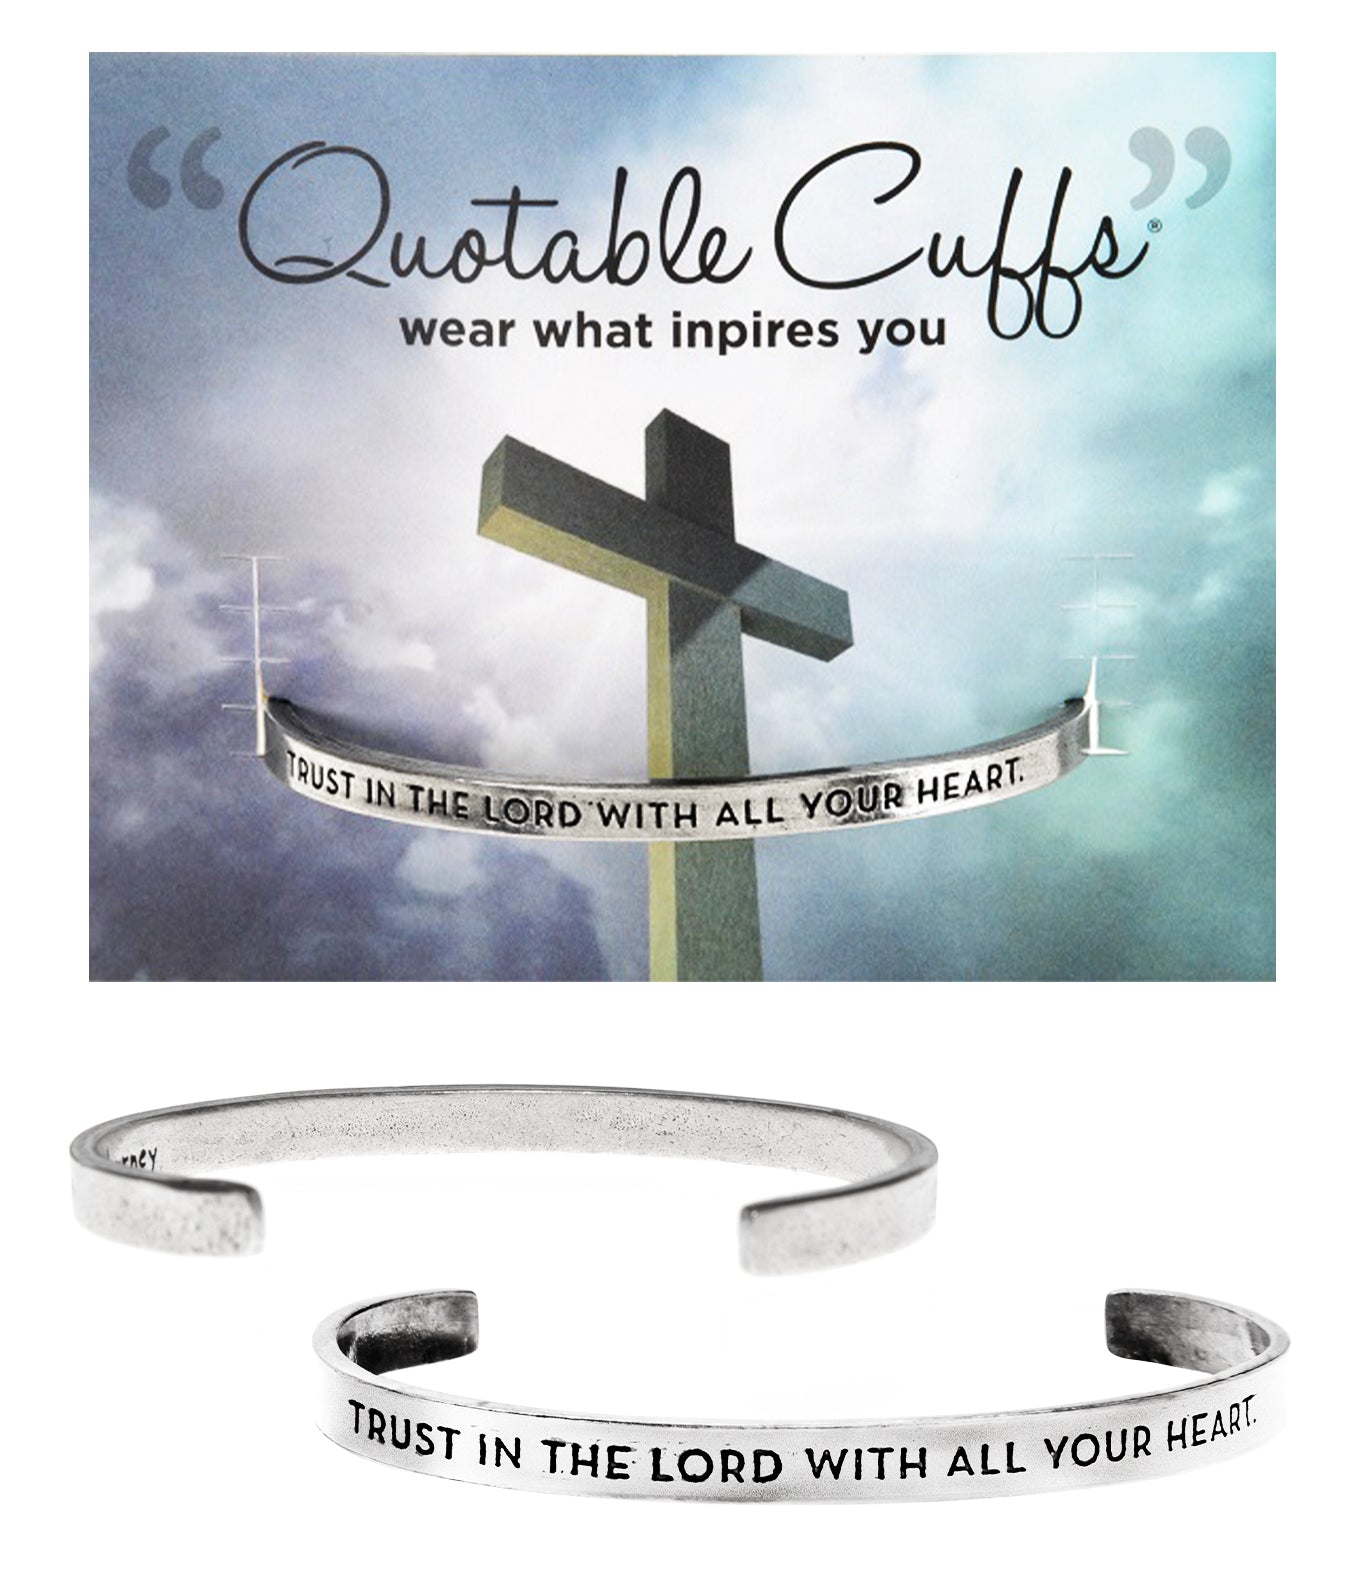 Trust in the Lord With All Heart Quotable Cuff Bracelet Proverbs 3:5-6 with backer card